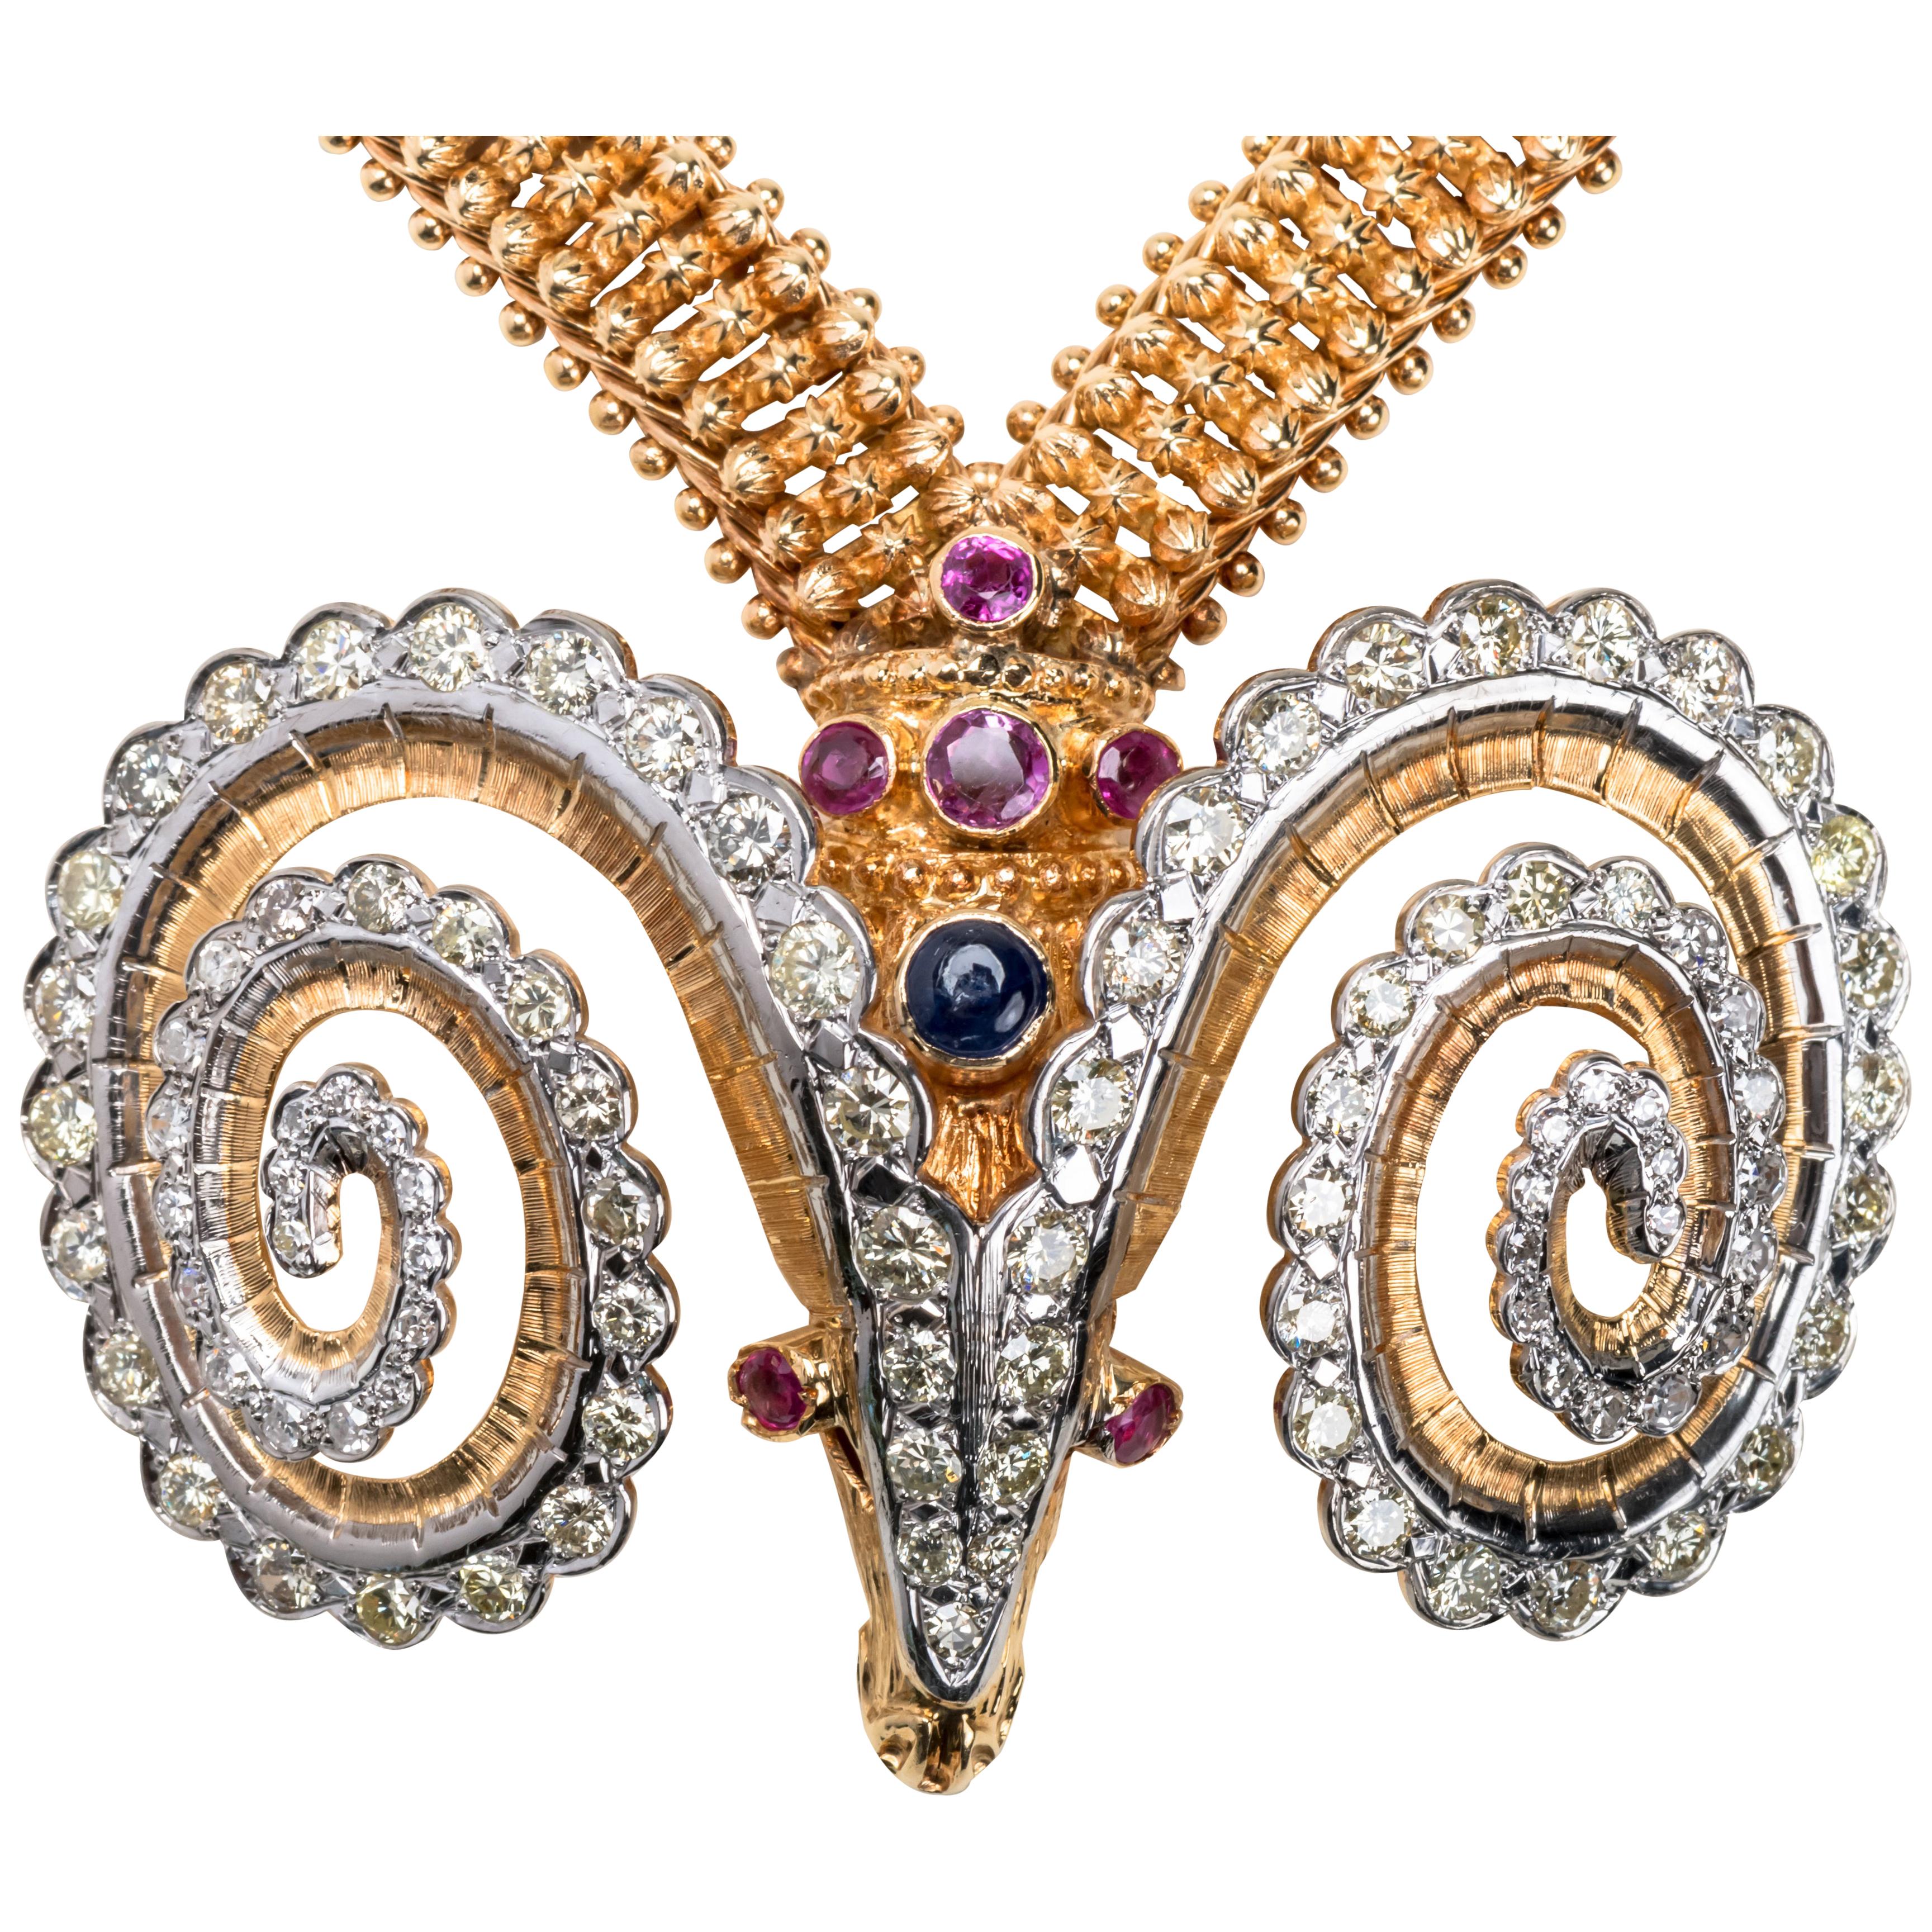 18 Karat Gold Necklace with Pendant with Diamonds Rubies and a Cabochon Sapphire For Sale